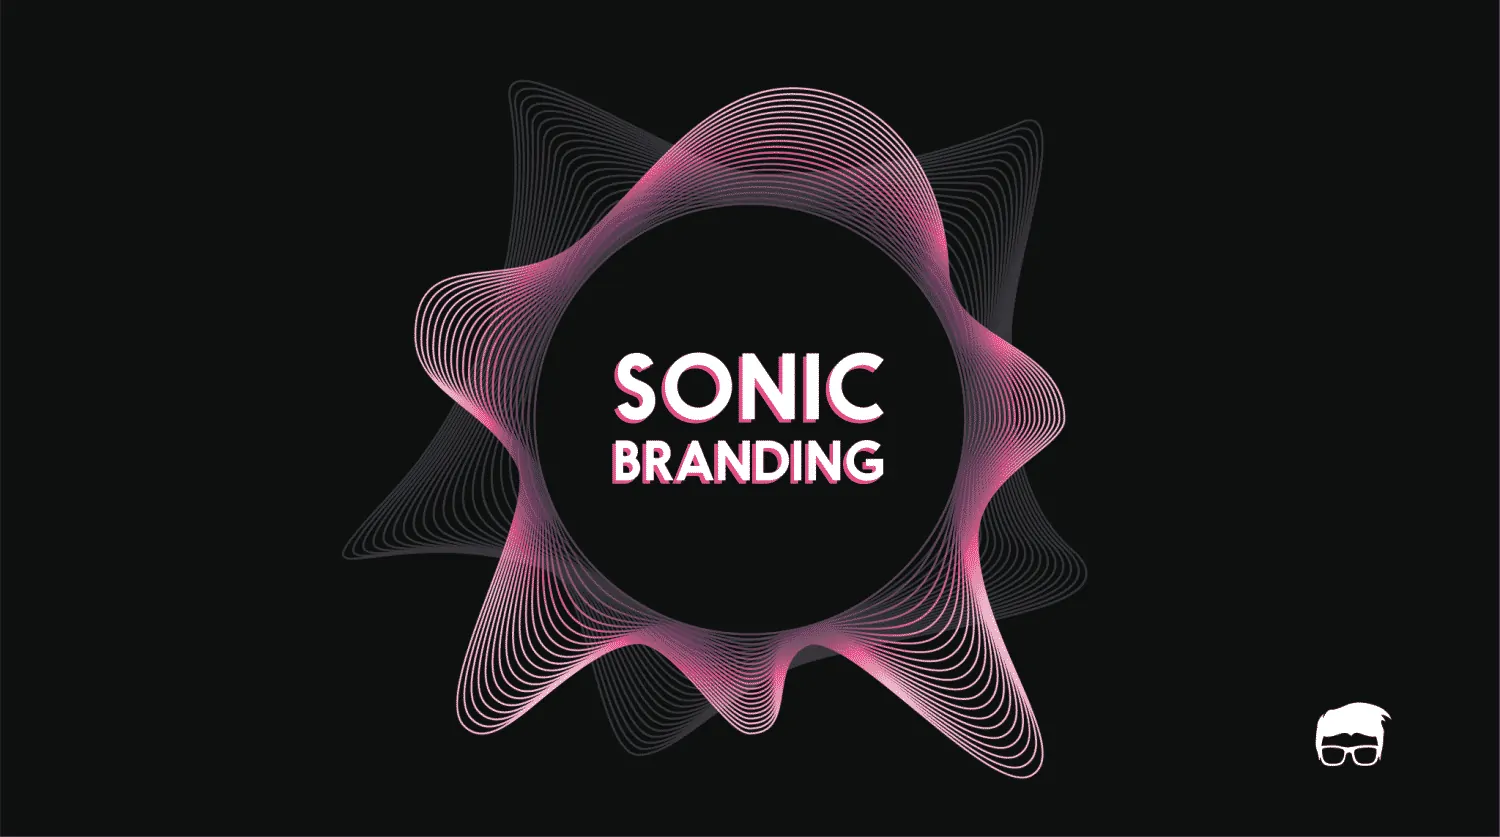 What Is Sonic Branding? The Psychology Of Sonic Branding